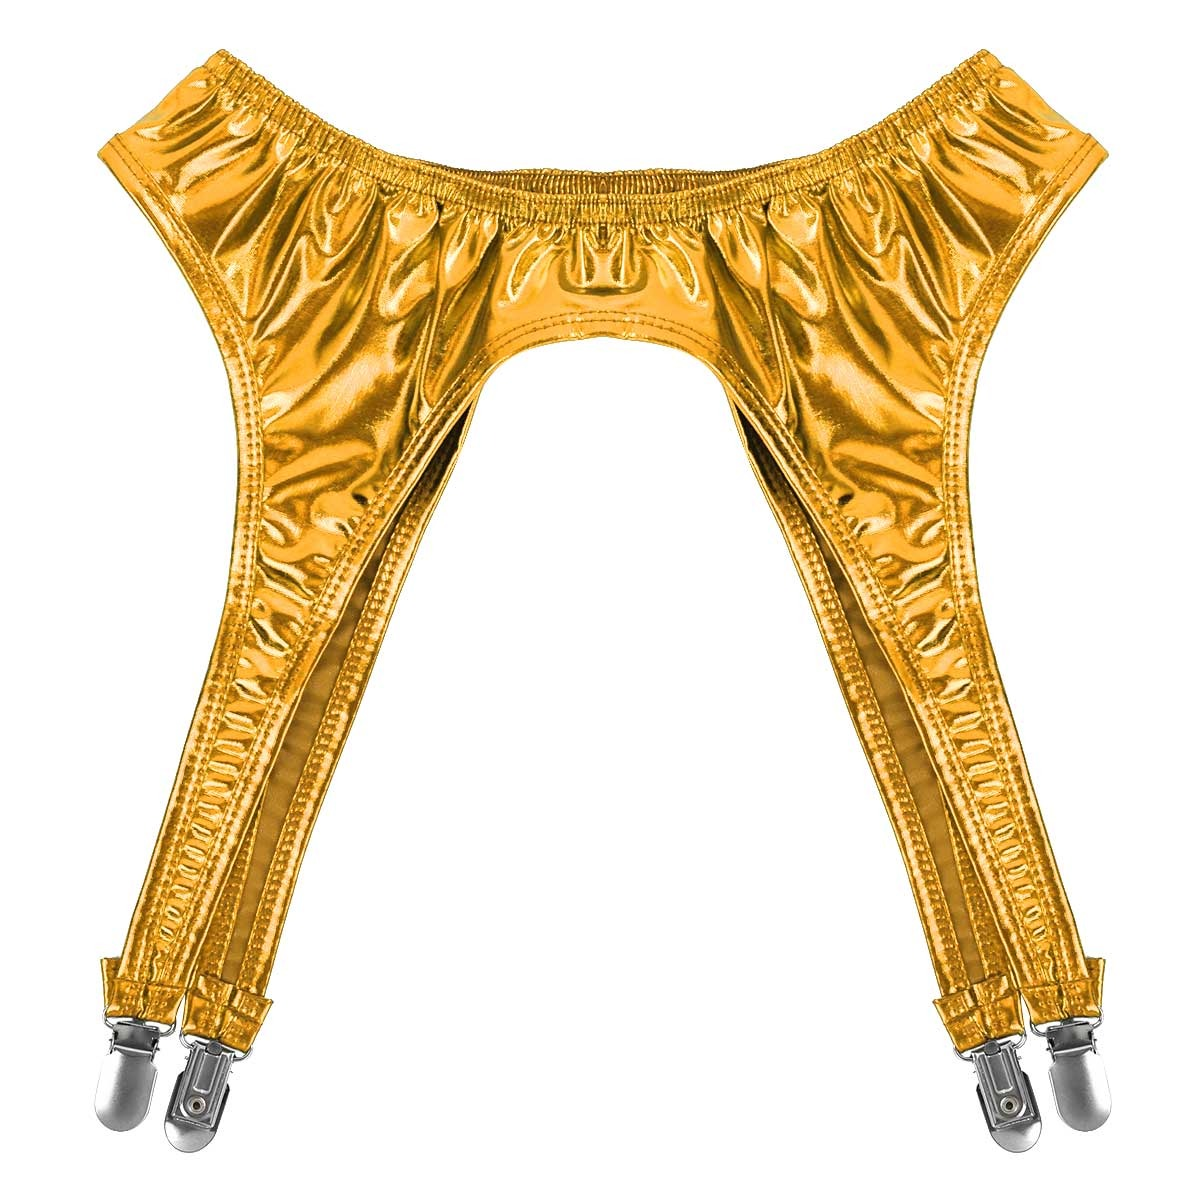 Women's Erotic Shiny Sexy Garter / Adult Underwear with Duck-Mouth Clips - EVE's SECRETS